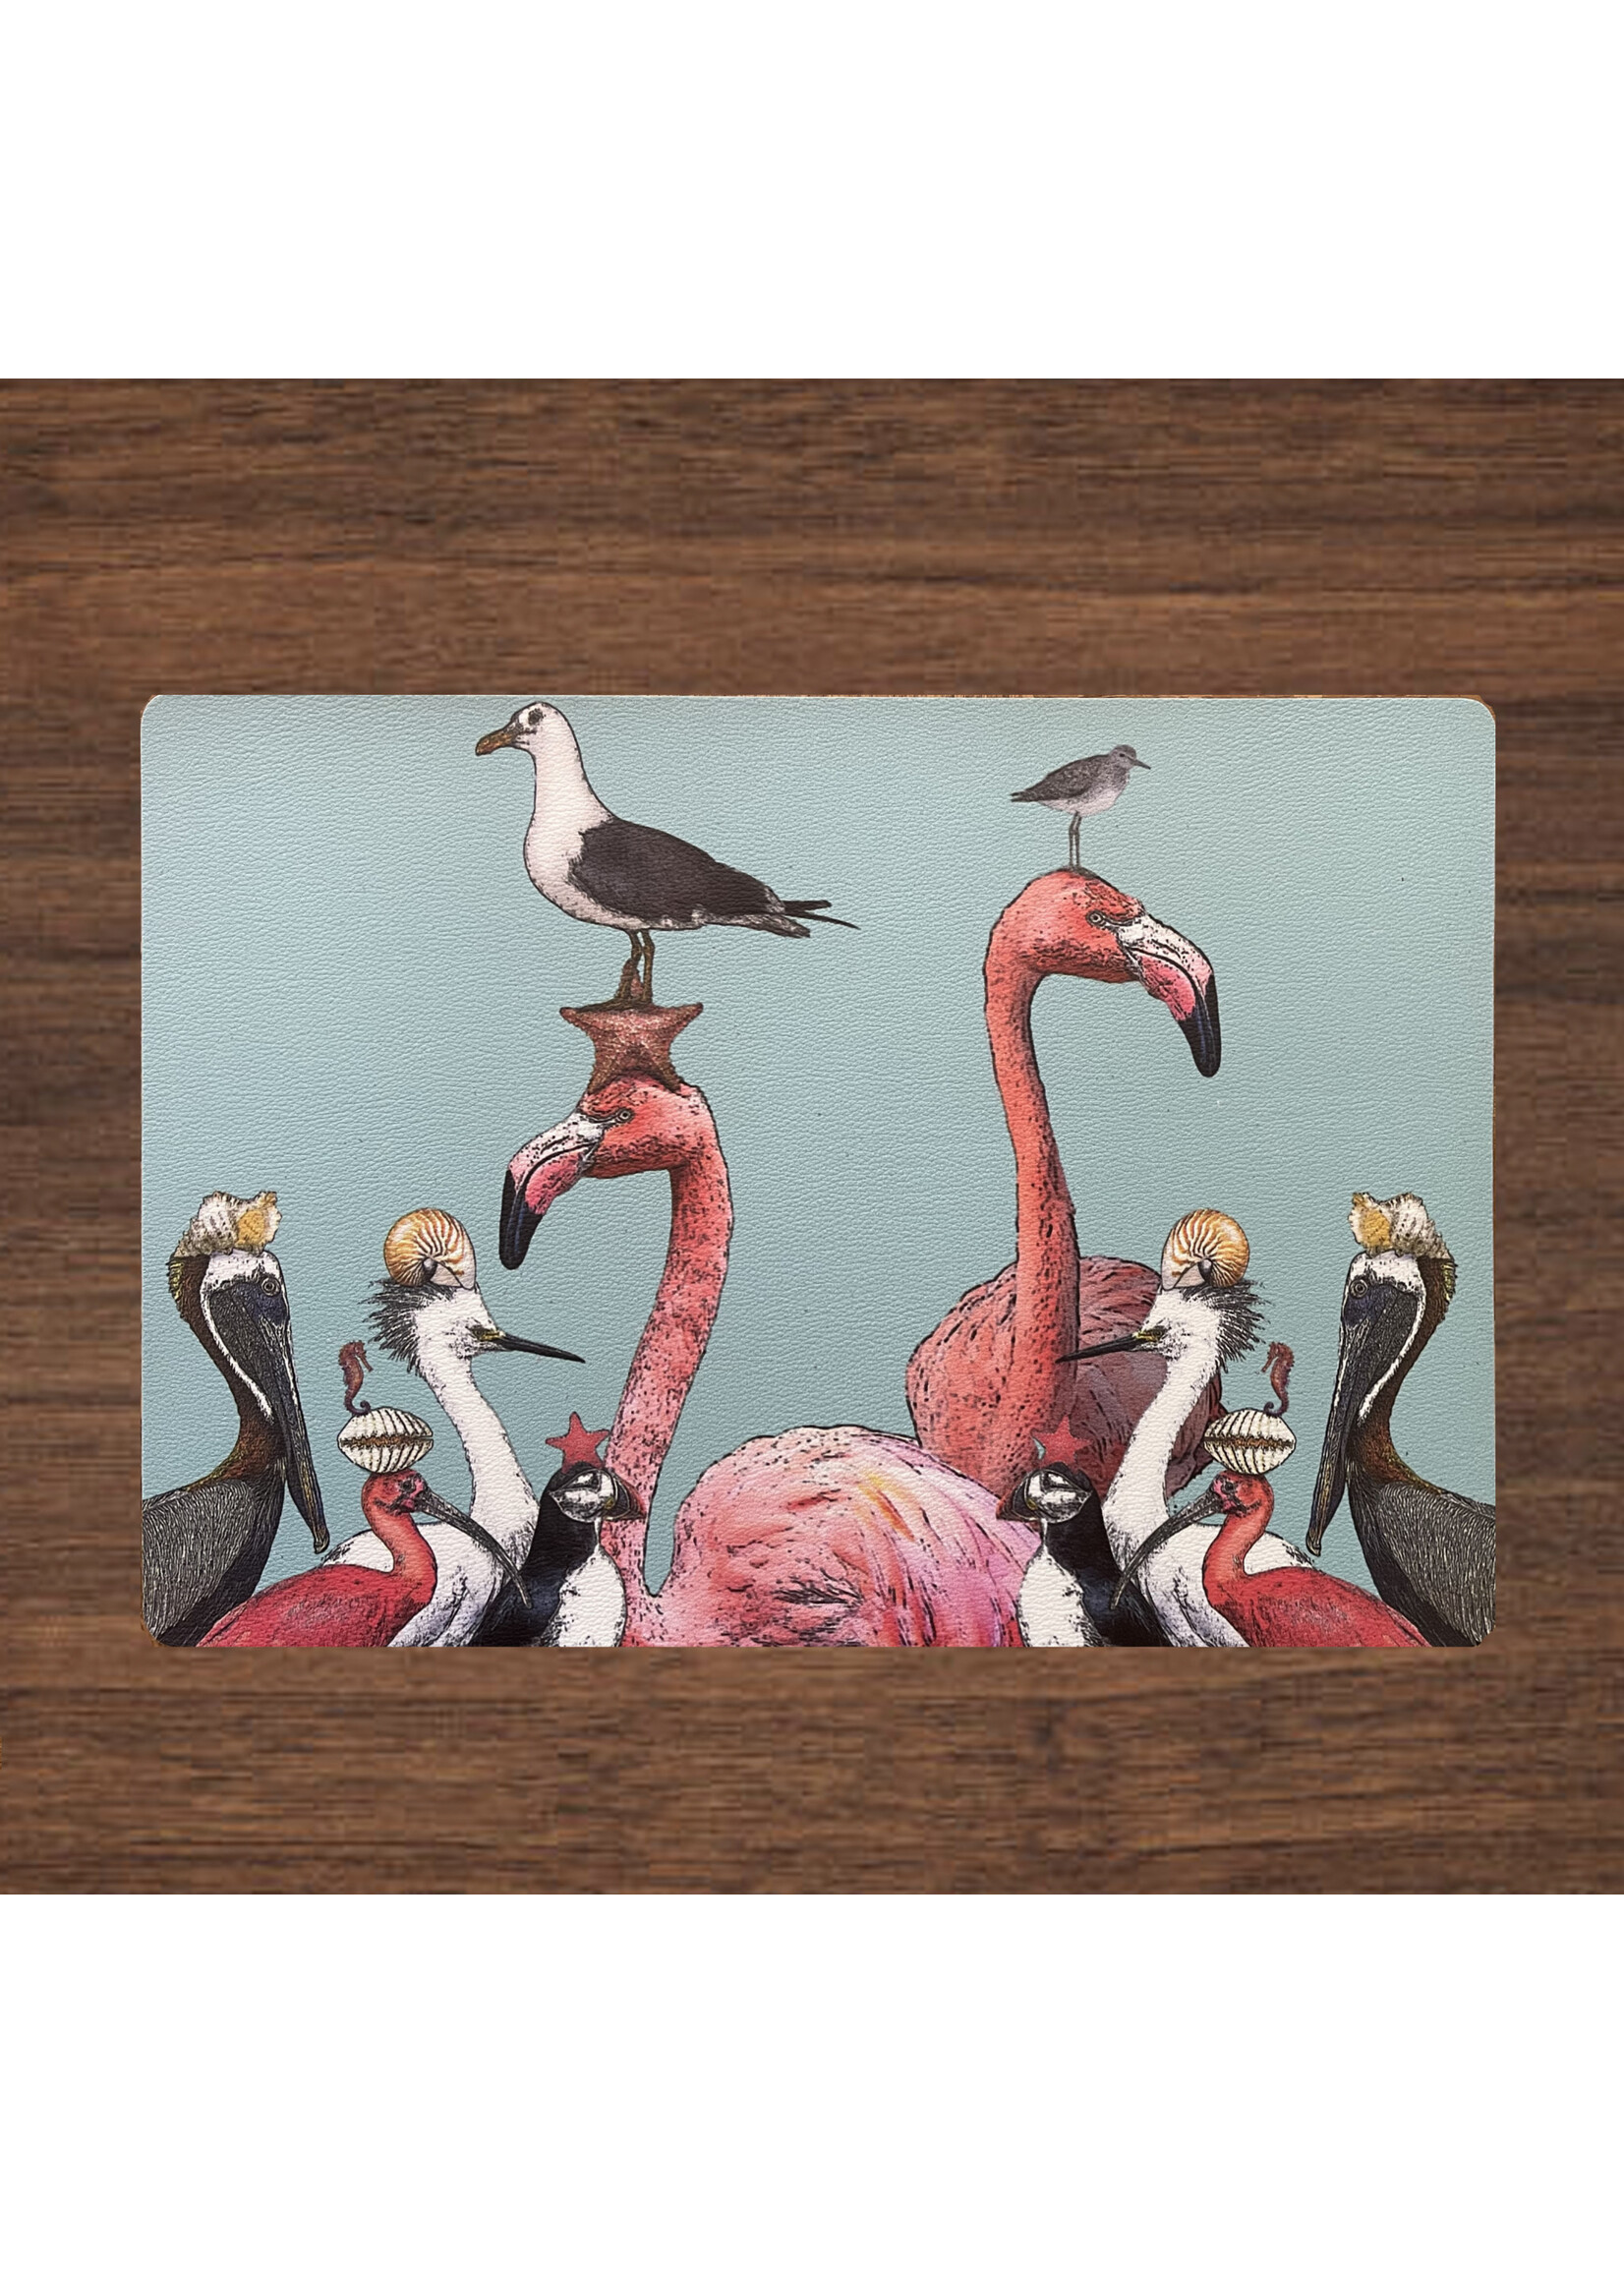 Alphie and Ollie sea birds  vinyl placemat 12 x 17 inches